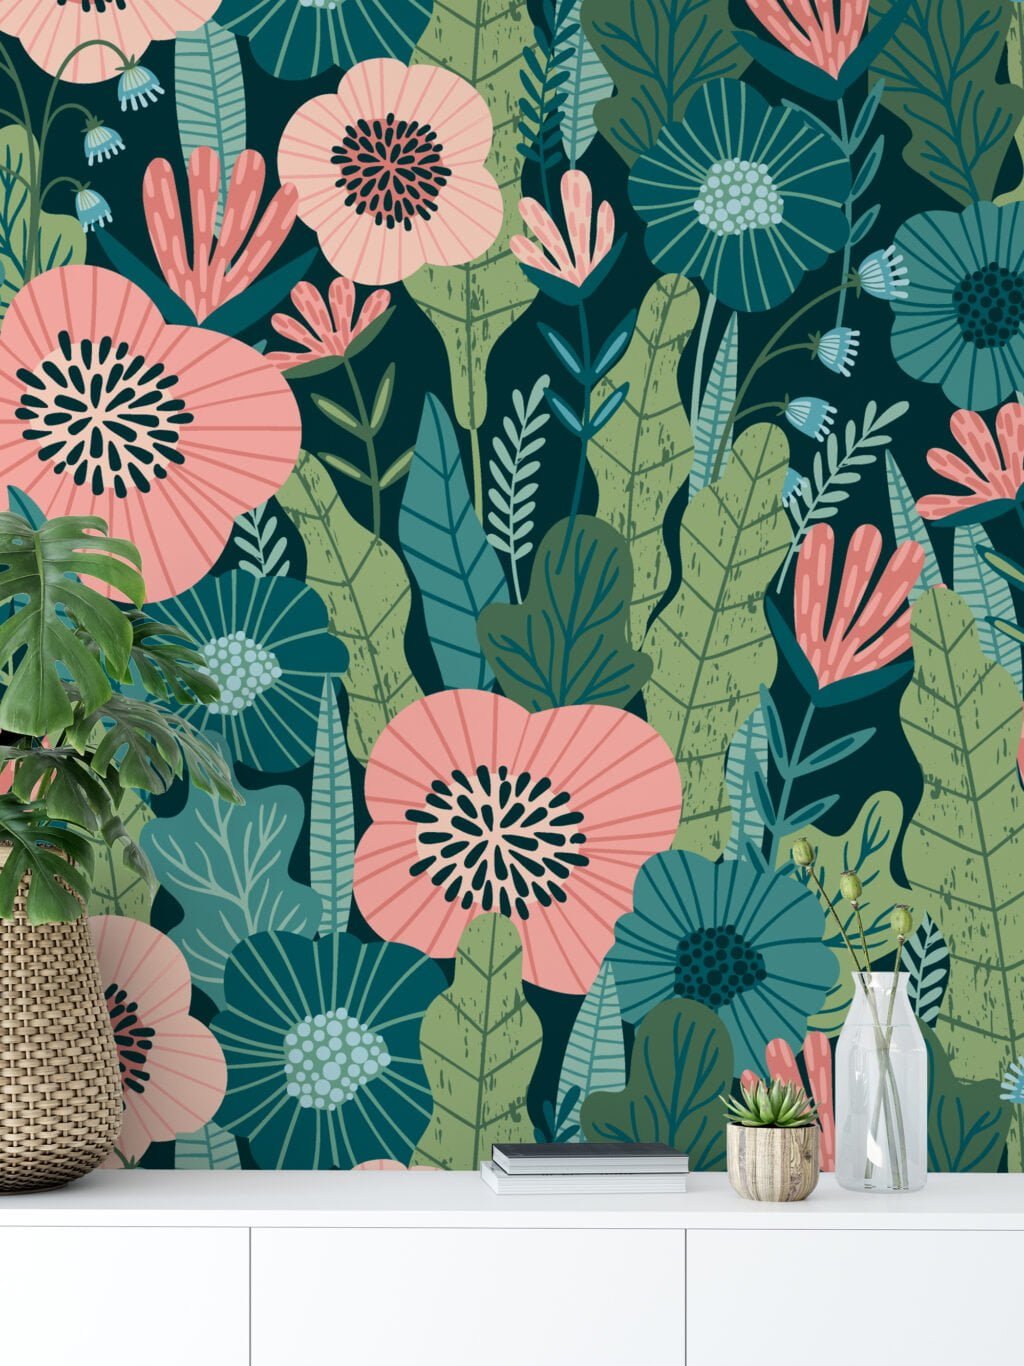 Flat Art Abstract Green Leaves With Flowers Wallpaper, Tropical Pink Blooms On Green Peel & Stick Wall Mural